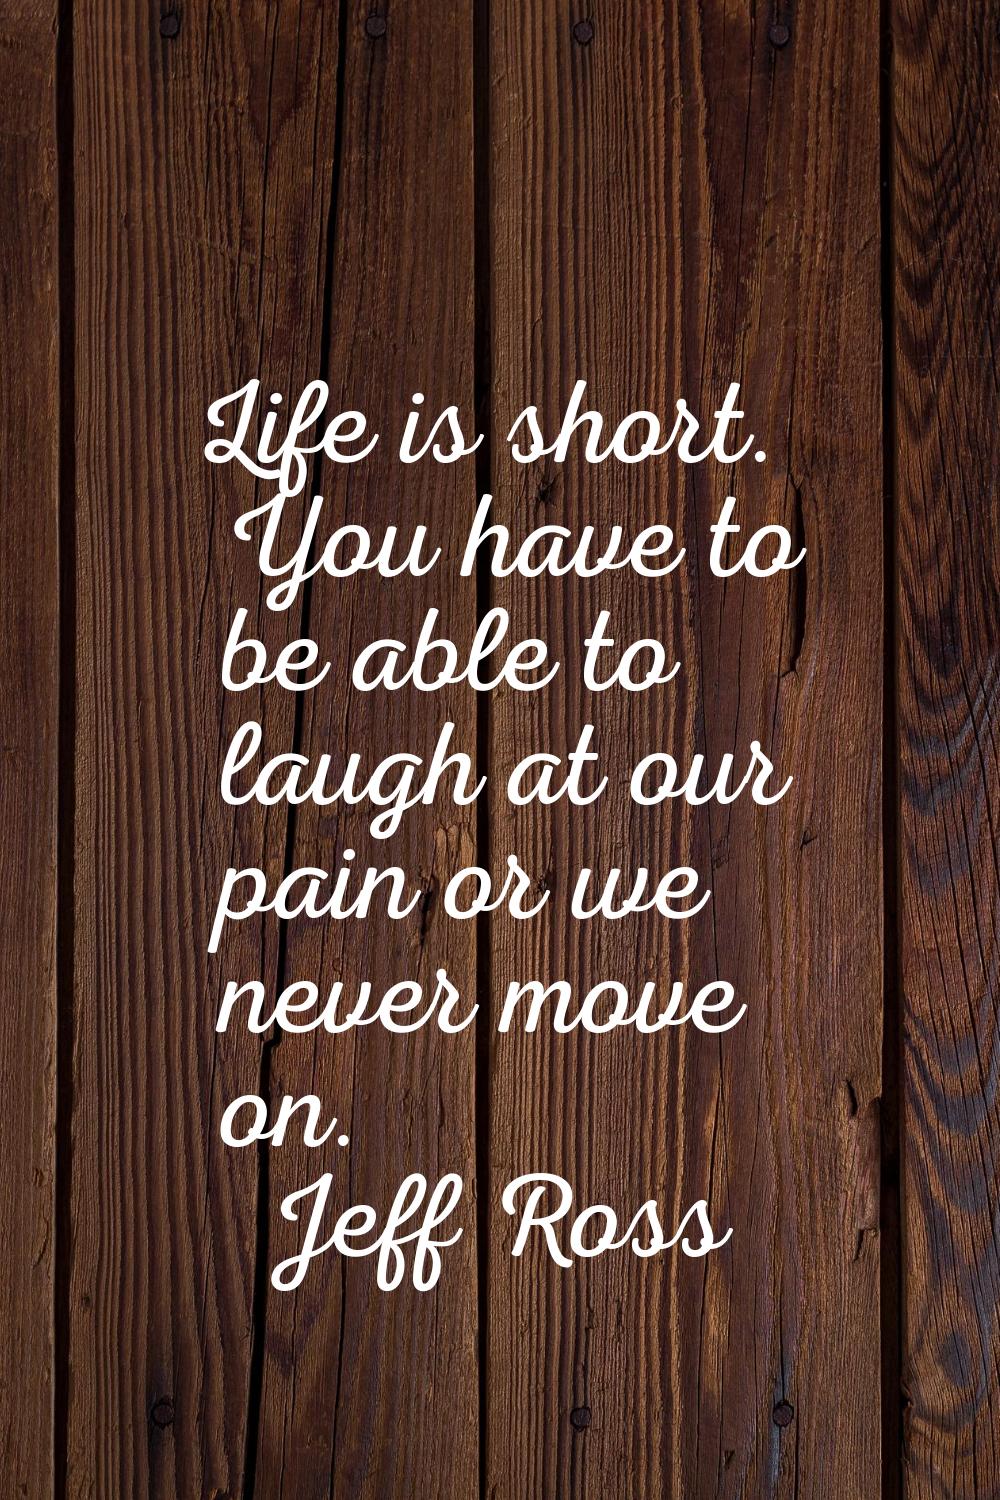 Life is short. You have to be able to laugh at our pain or we never move on.